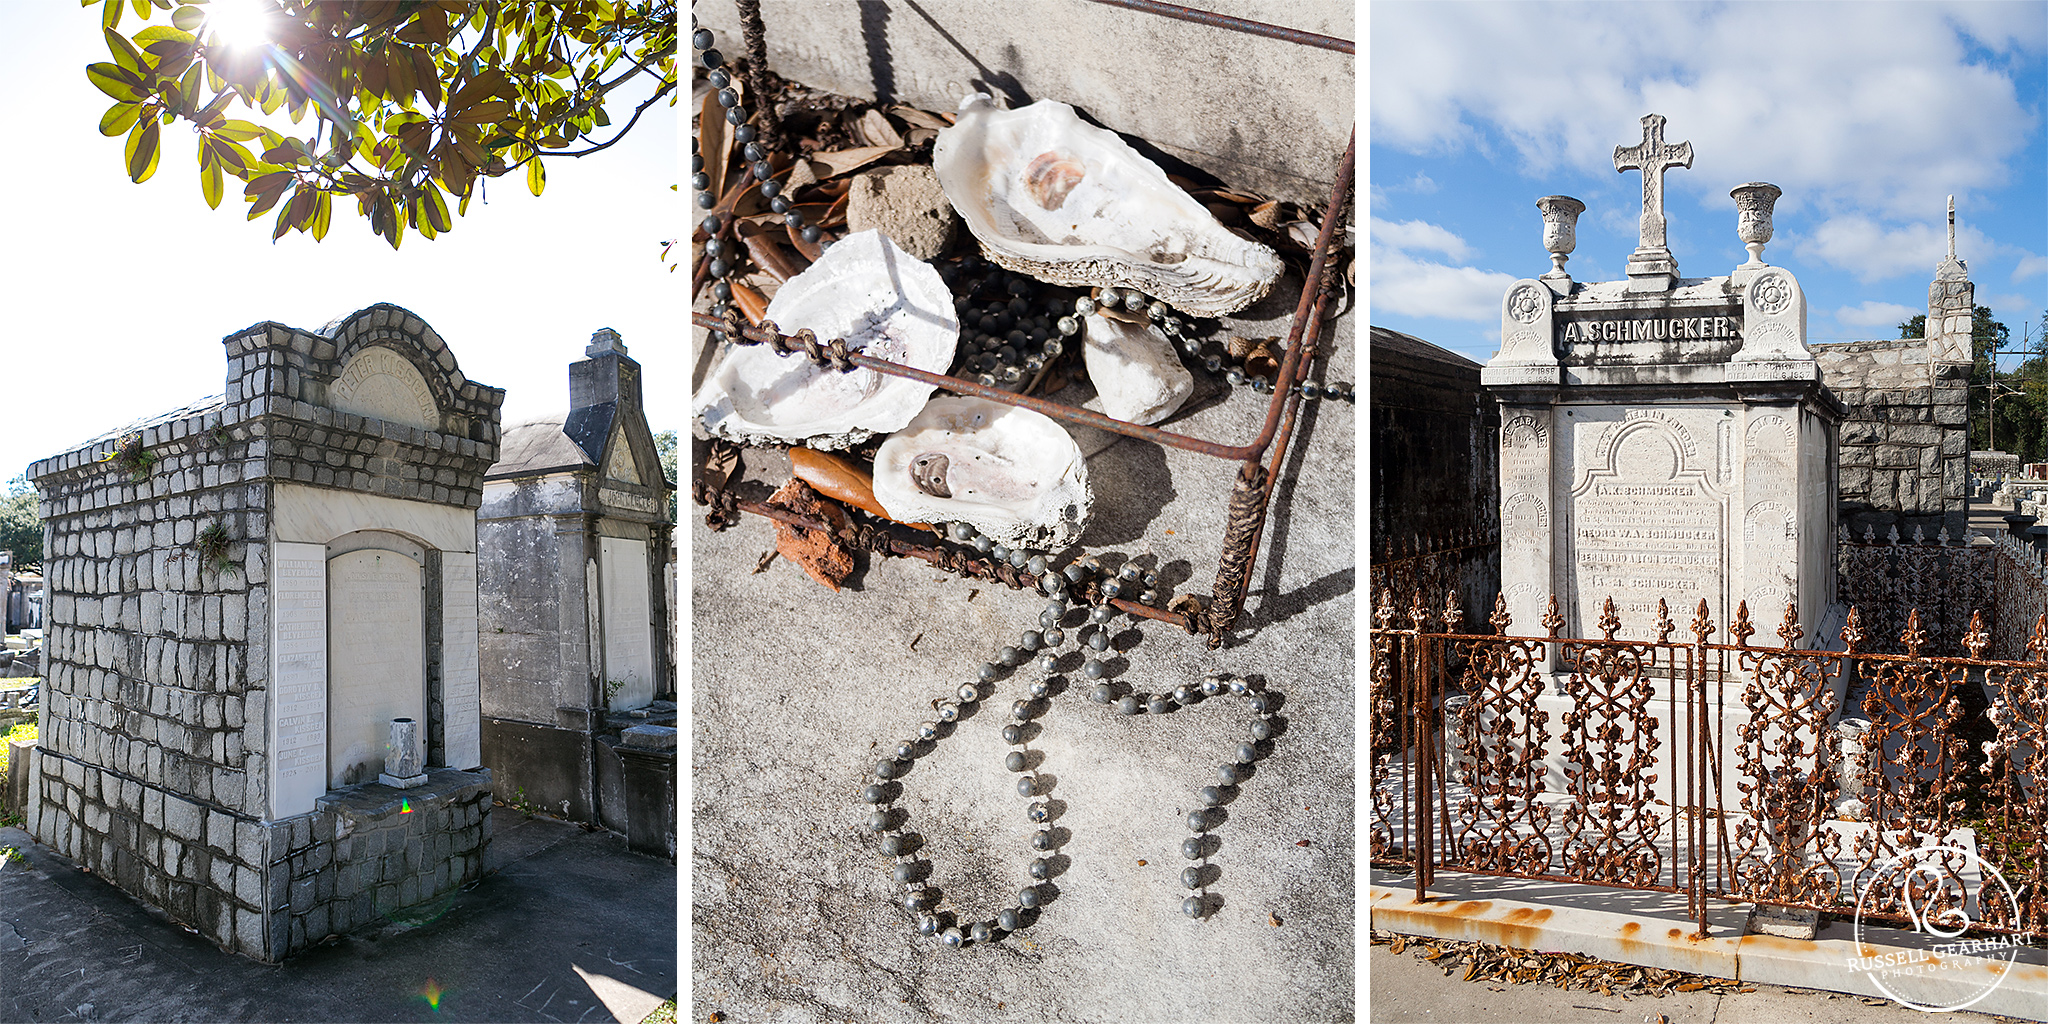 The graves are decorated with mardi-gras beads, oysters, and flowers.